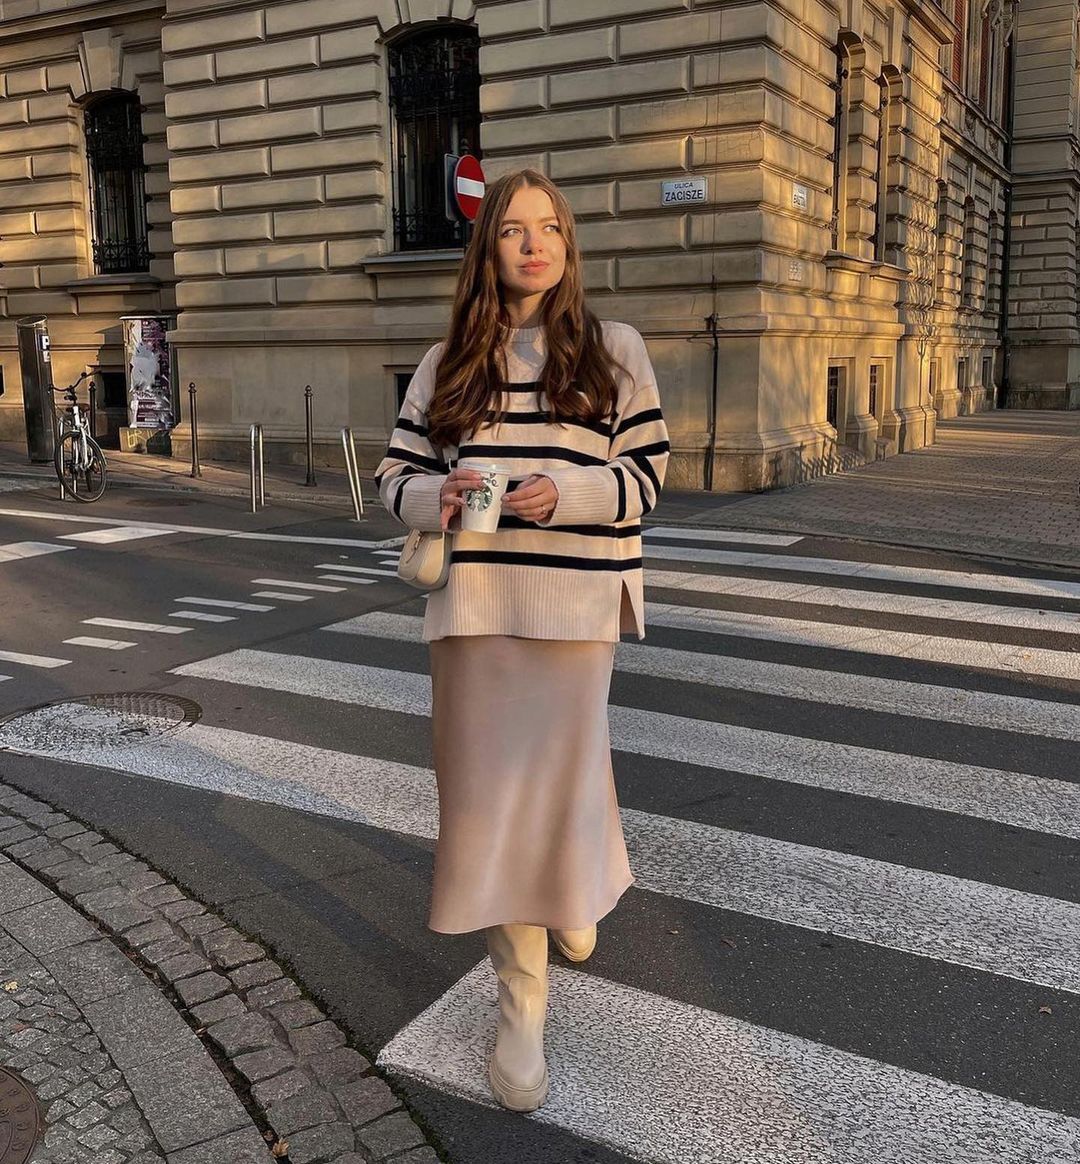 Sunkissed goddess coming through ☀️All slay, no mercy when our girl @lototskayalera glows in our Creamy Cappuccino Satin Skirt + Drop Shoulder Striped Sweater📽 Sweater🔍OA21110632 Skirt🔍OA220824024 Check it out at thecommense.com, link in bio! #commense #cmsgang